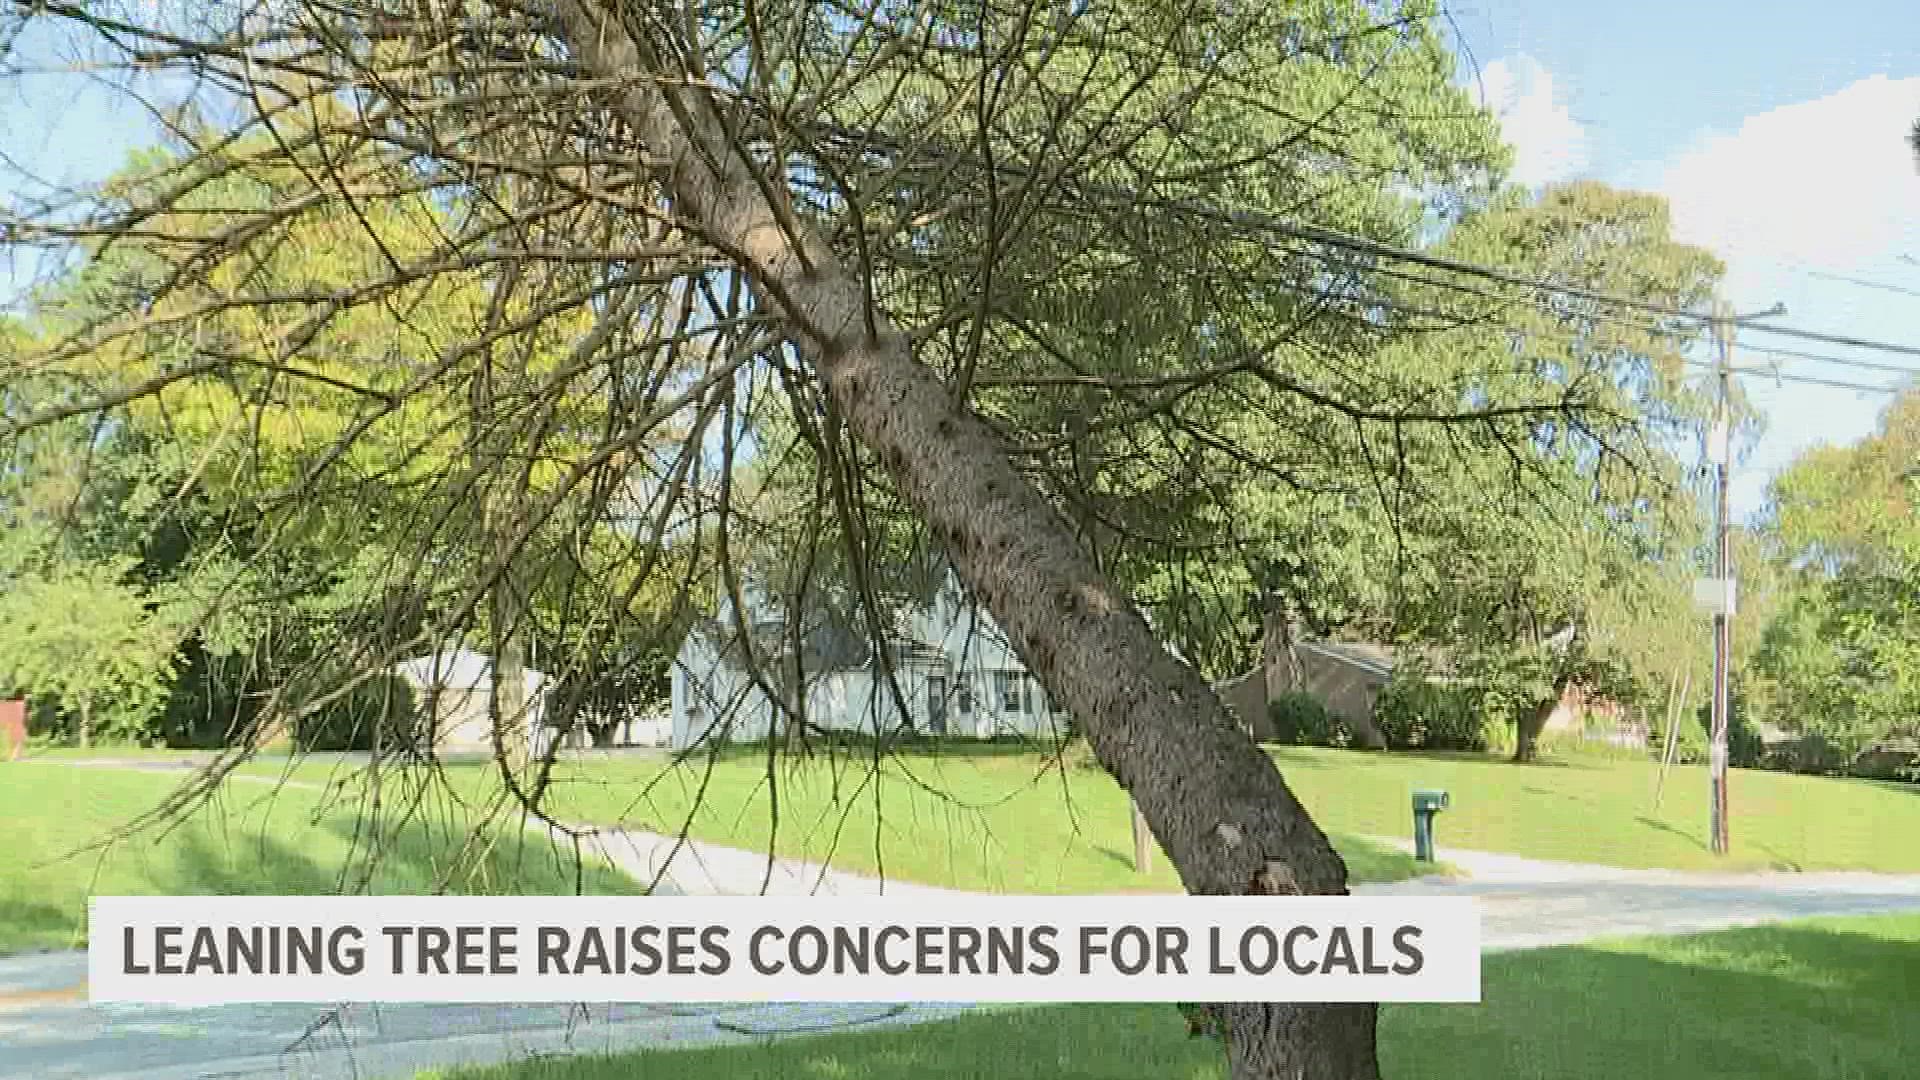 People living in a York County neighborhood say a tree had been dangerously perched on power lines near their homes for weeks.